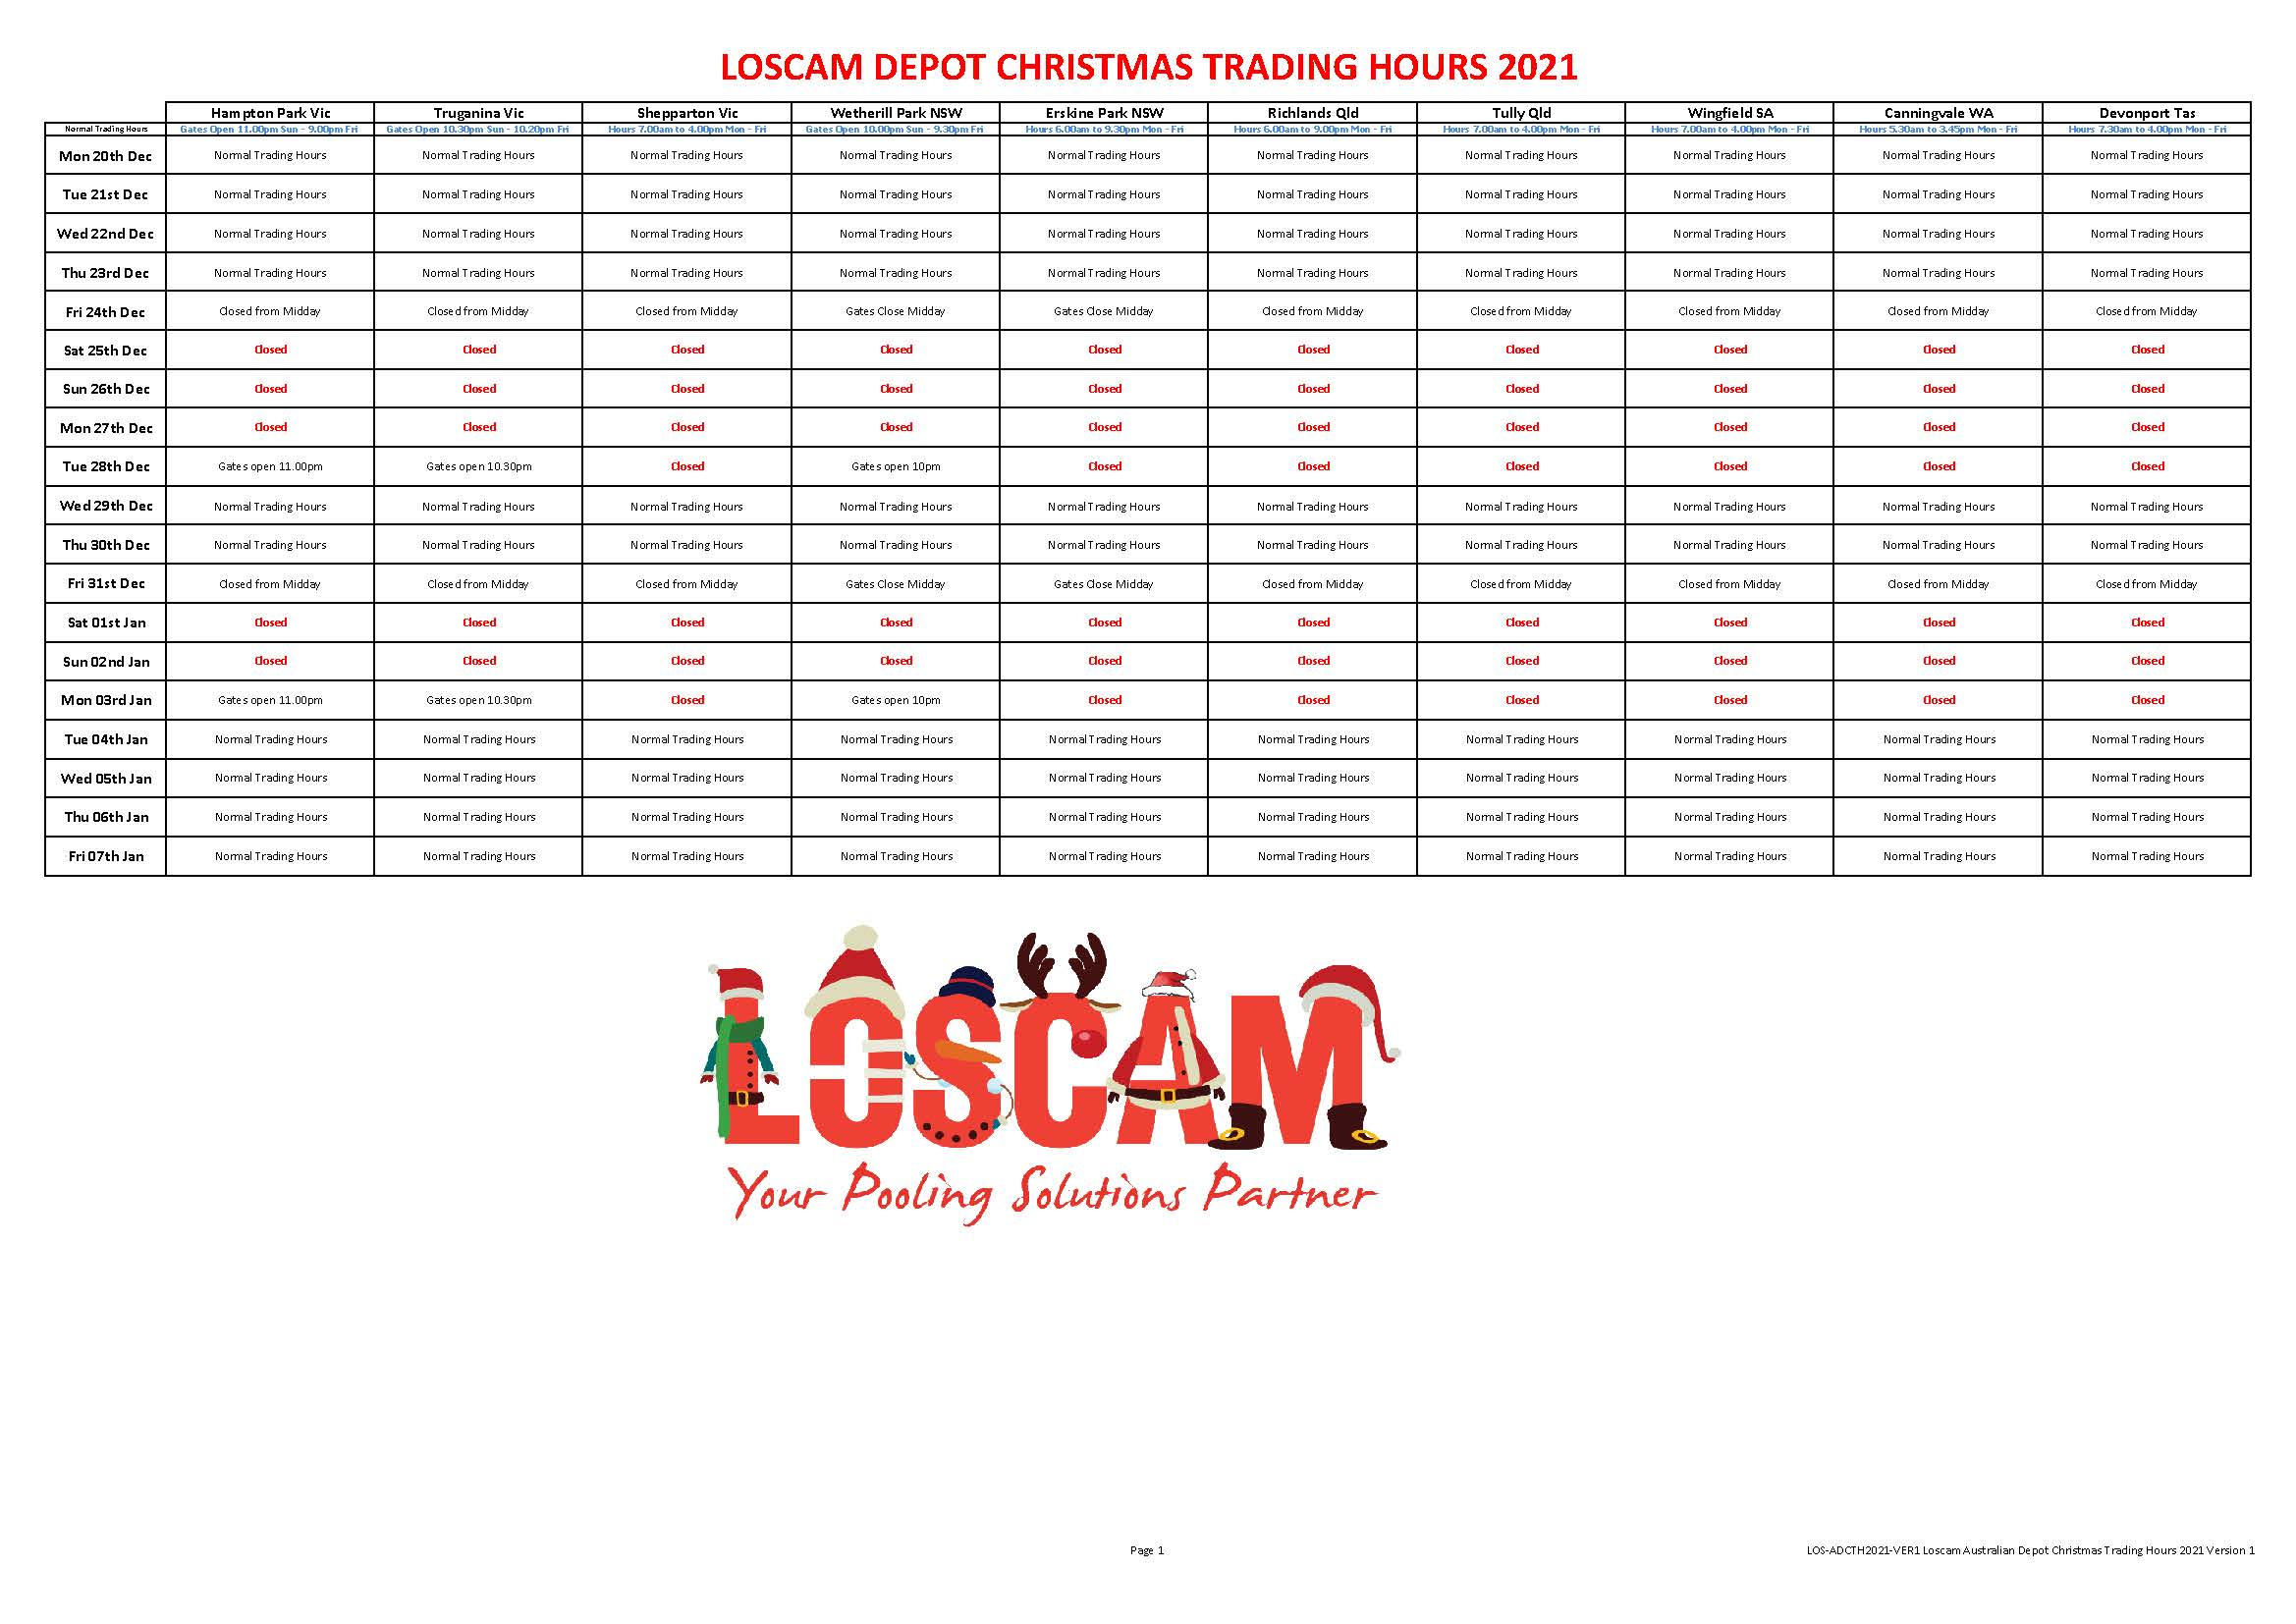 Los Adcth2021 Ver1 Loscam Australian Depot Christmas Trading Hours 2021 Version 1 002